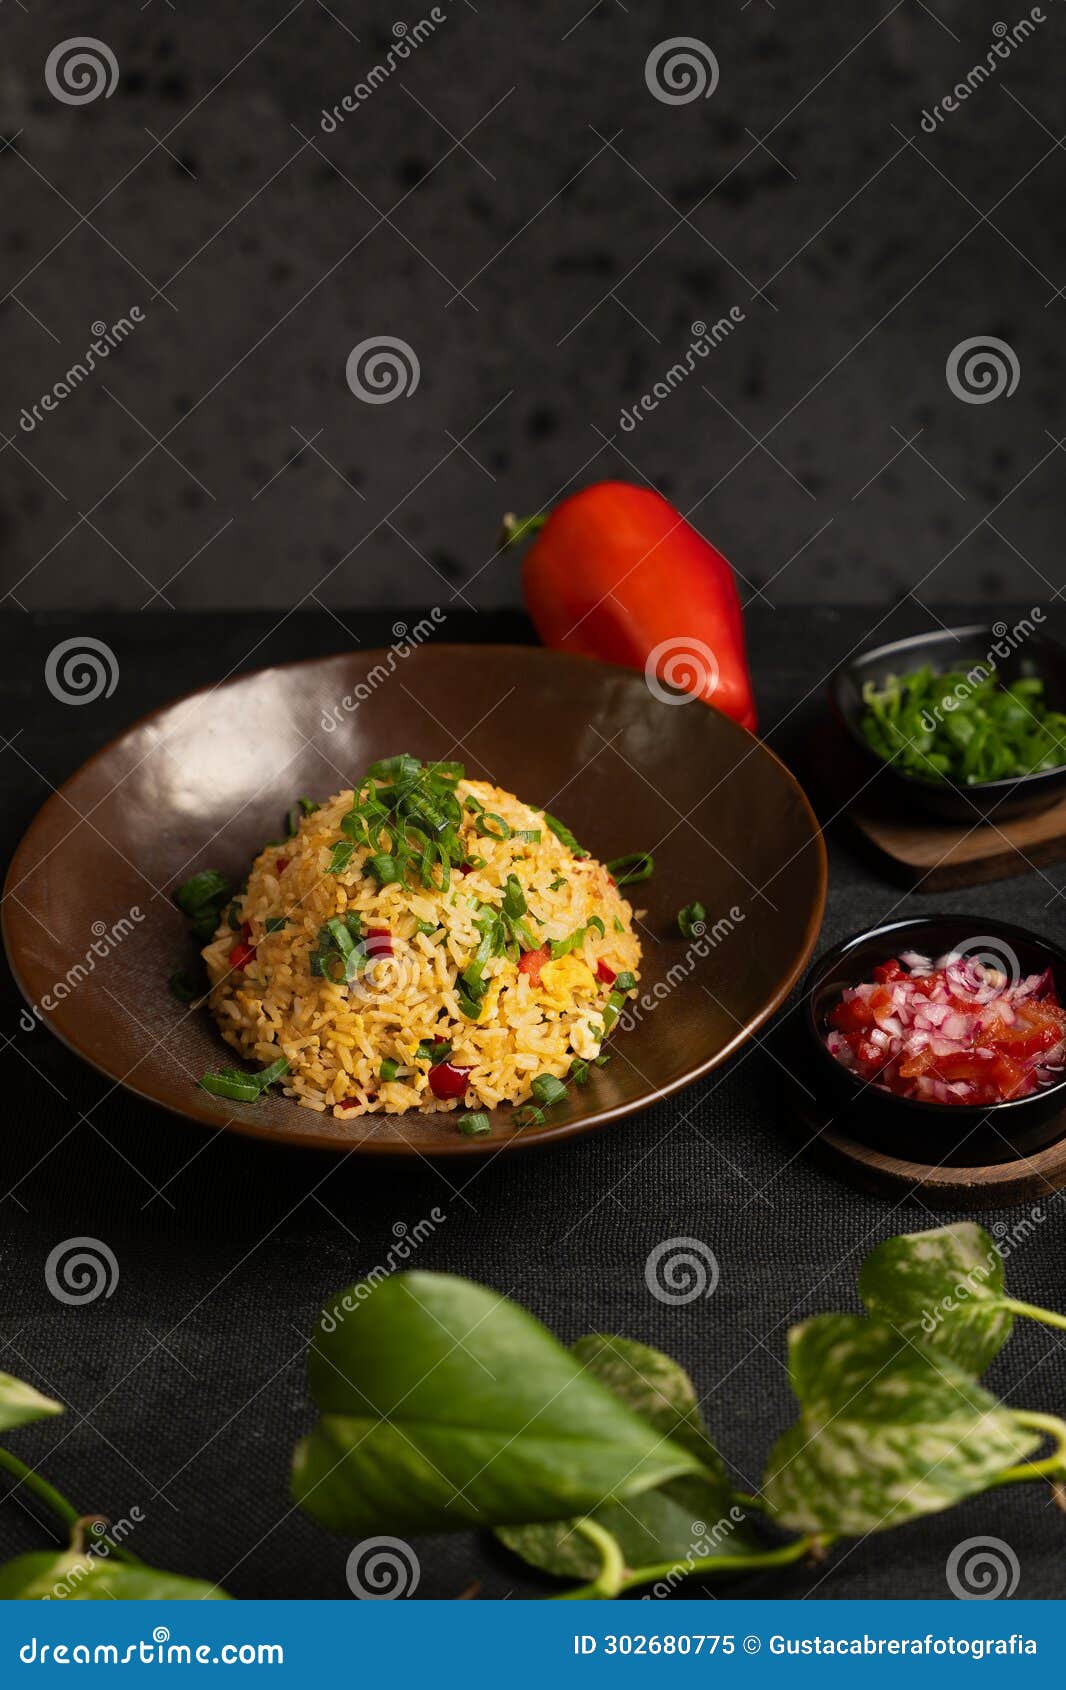 dish and colored ingredients on a dark background.